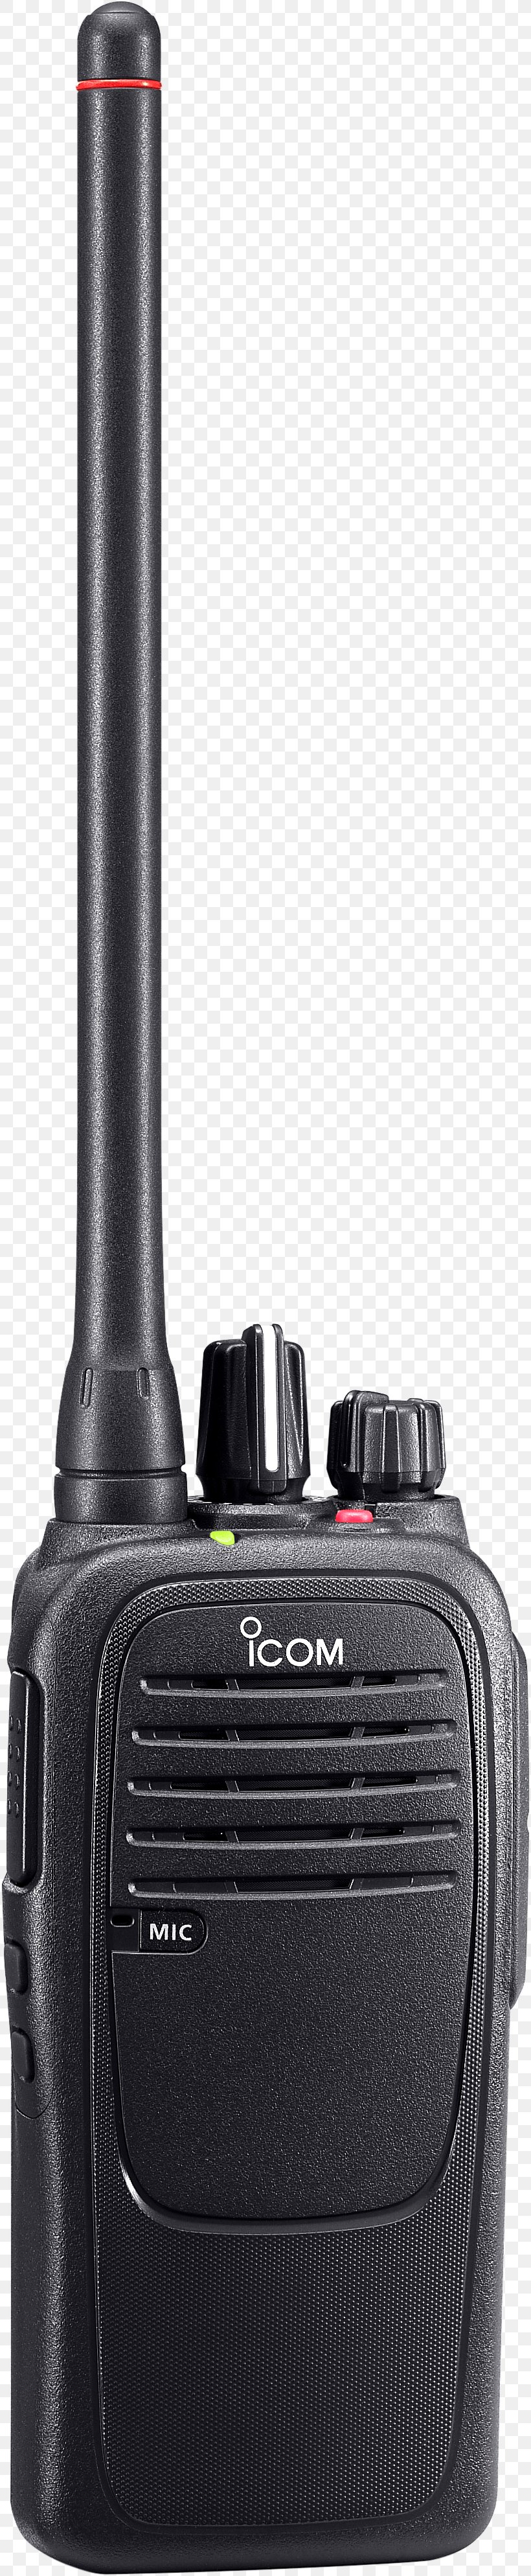 Icom Incorporated Walkie-talkie Icom IC-F2000 Radiotelephone, PNG, 819x3976px, Icom Incorporated, Bandes Marines, Digital Data, Electronic Device, Fn F2000 Download Free